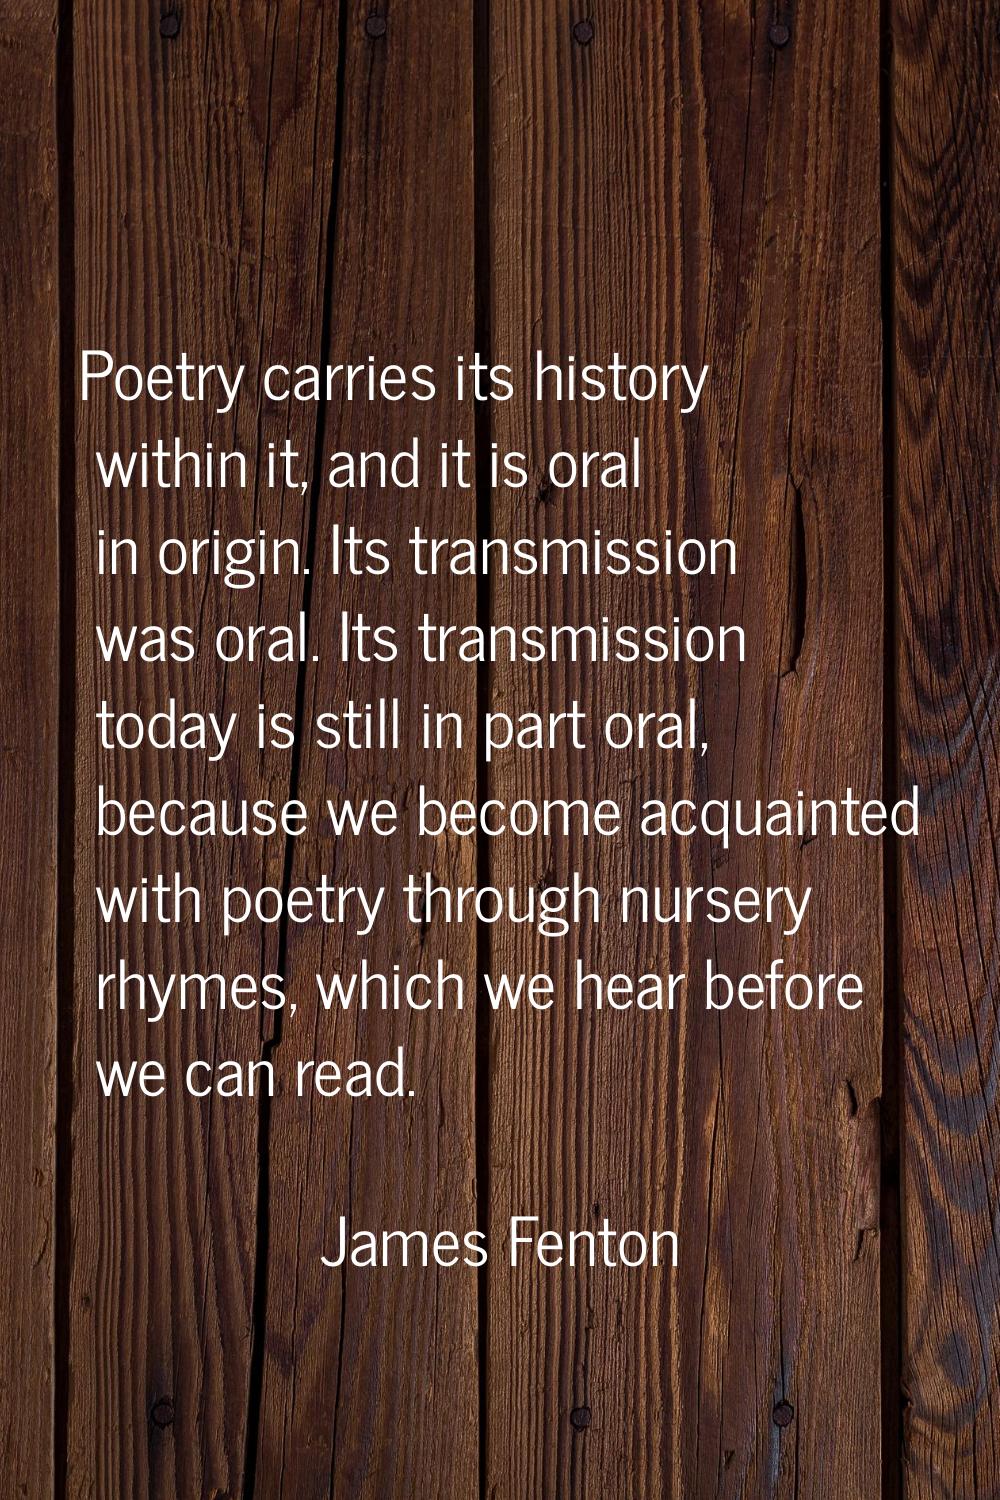 Poetry carries its history within it, and it is oral in origin. Its transmission was oral. Its tran